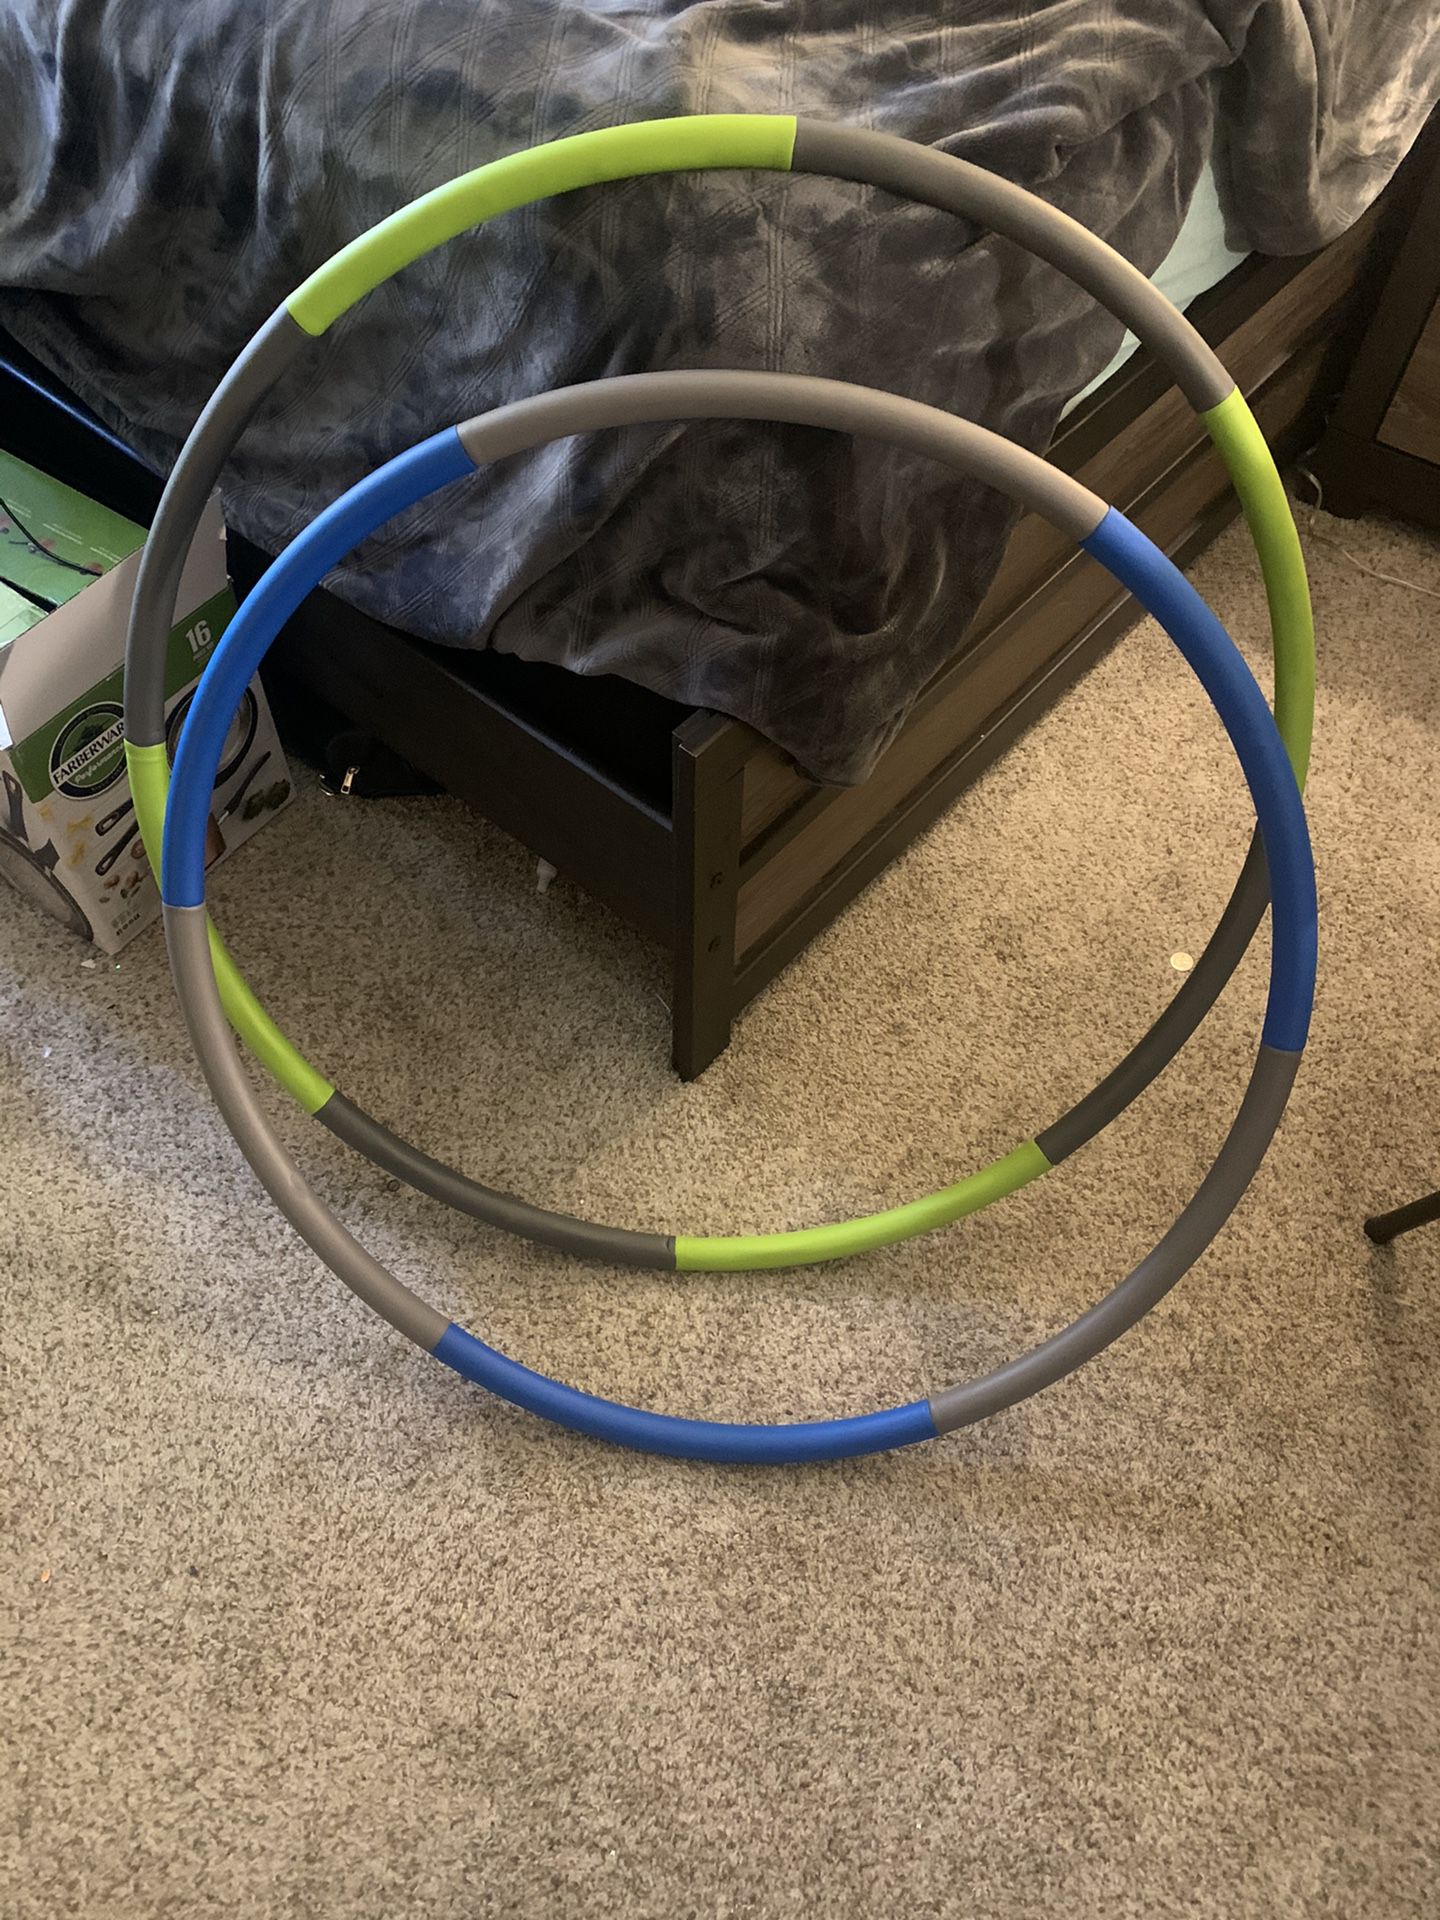 Weighted hula hoops